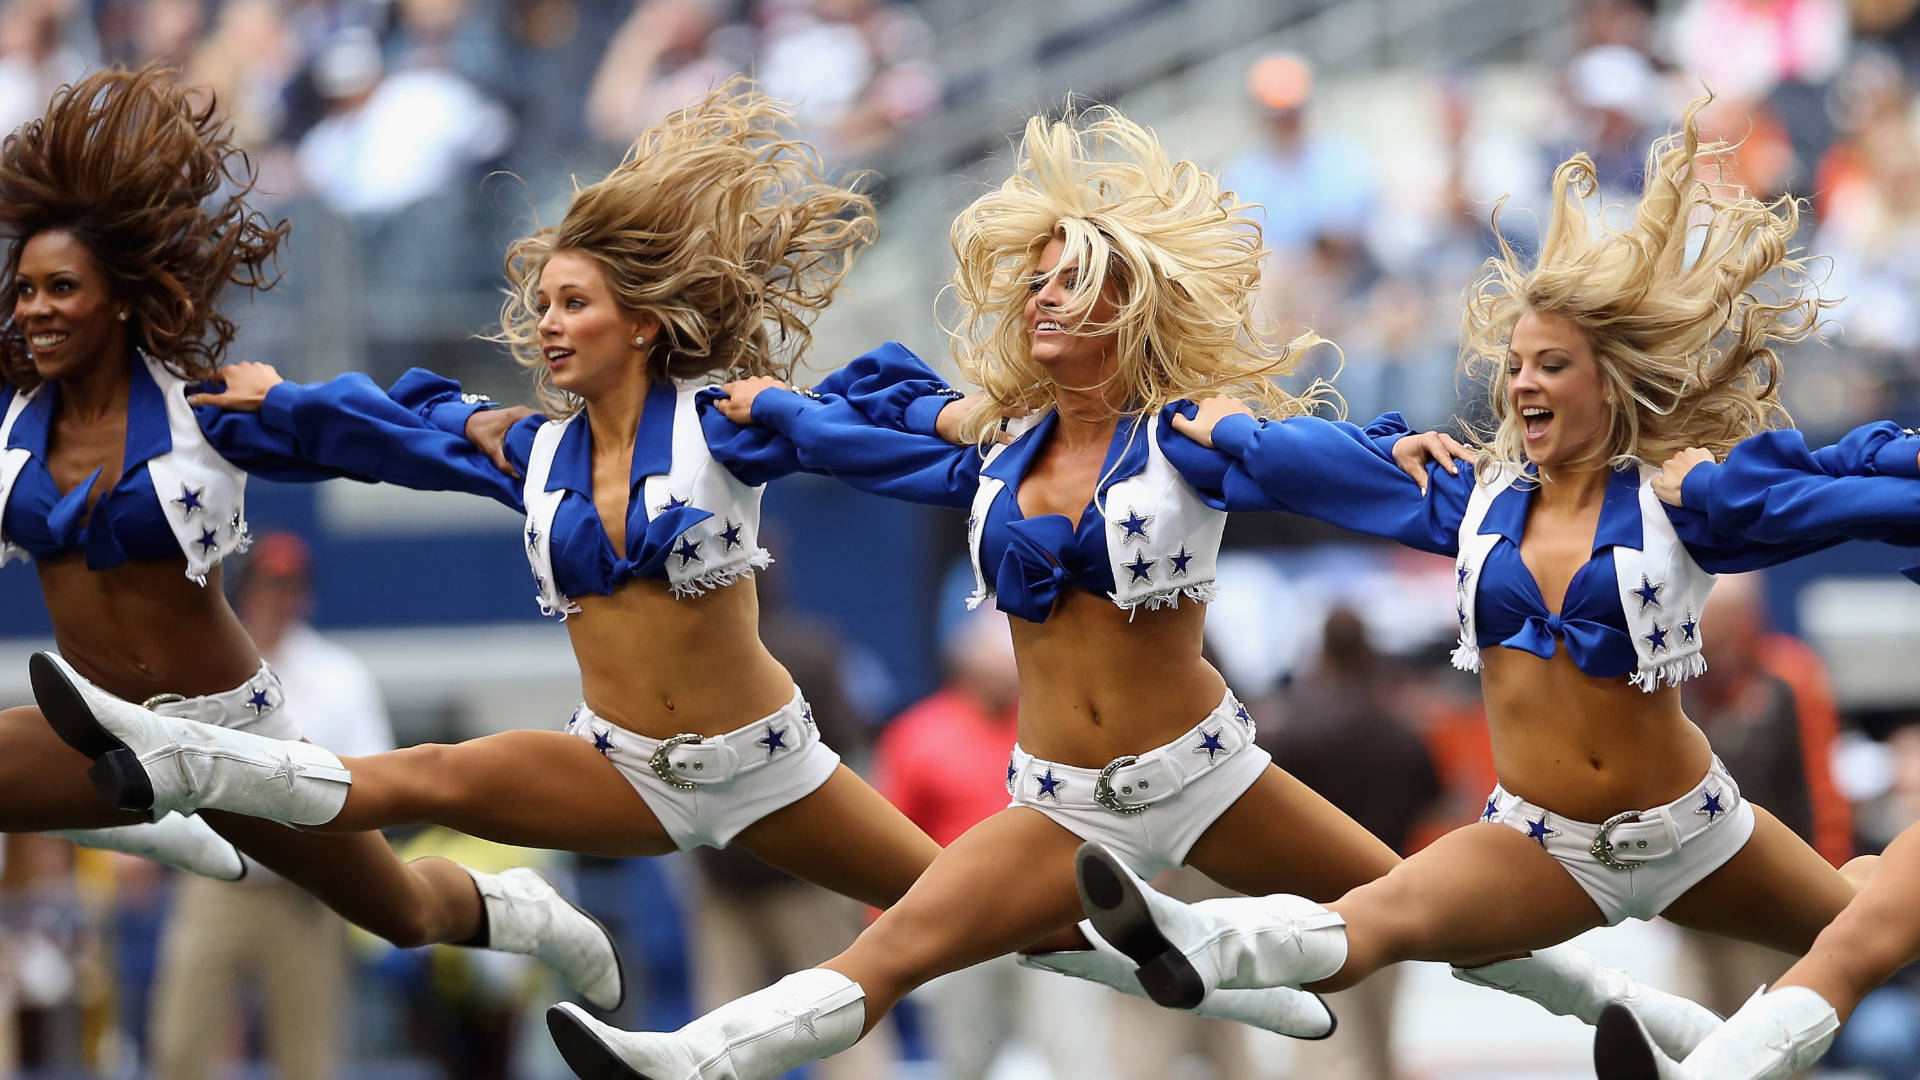 Jumping Cheerleaders For The Awesome Dallas Cowboys Wallpaper